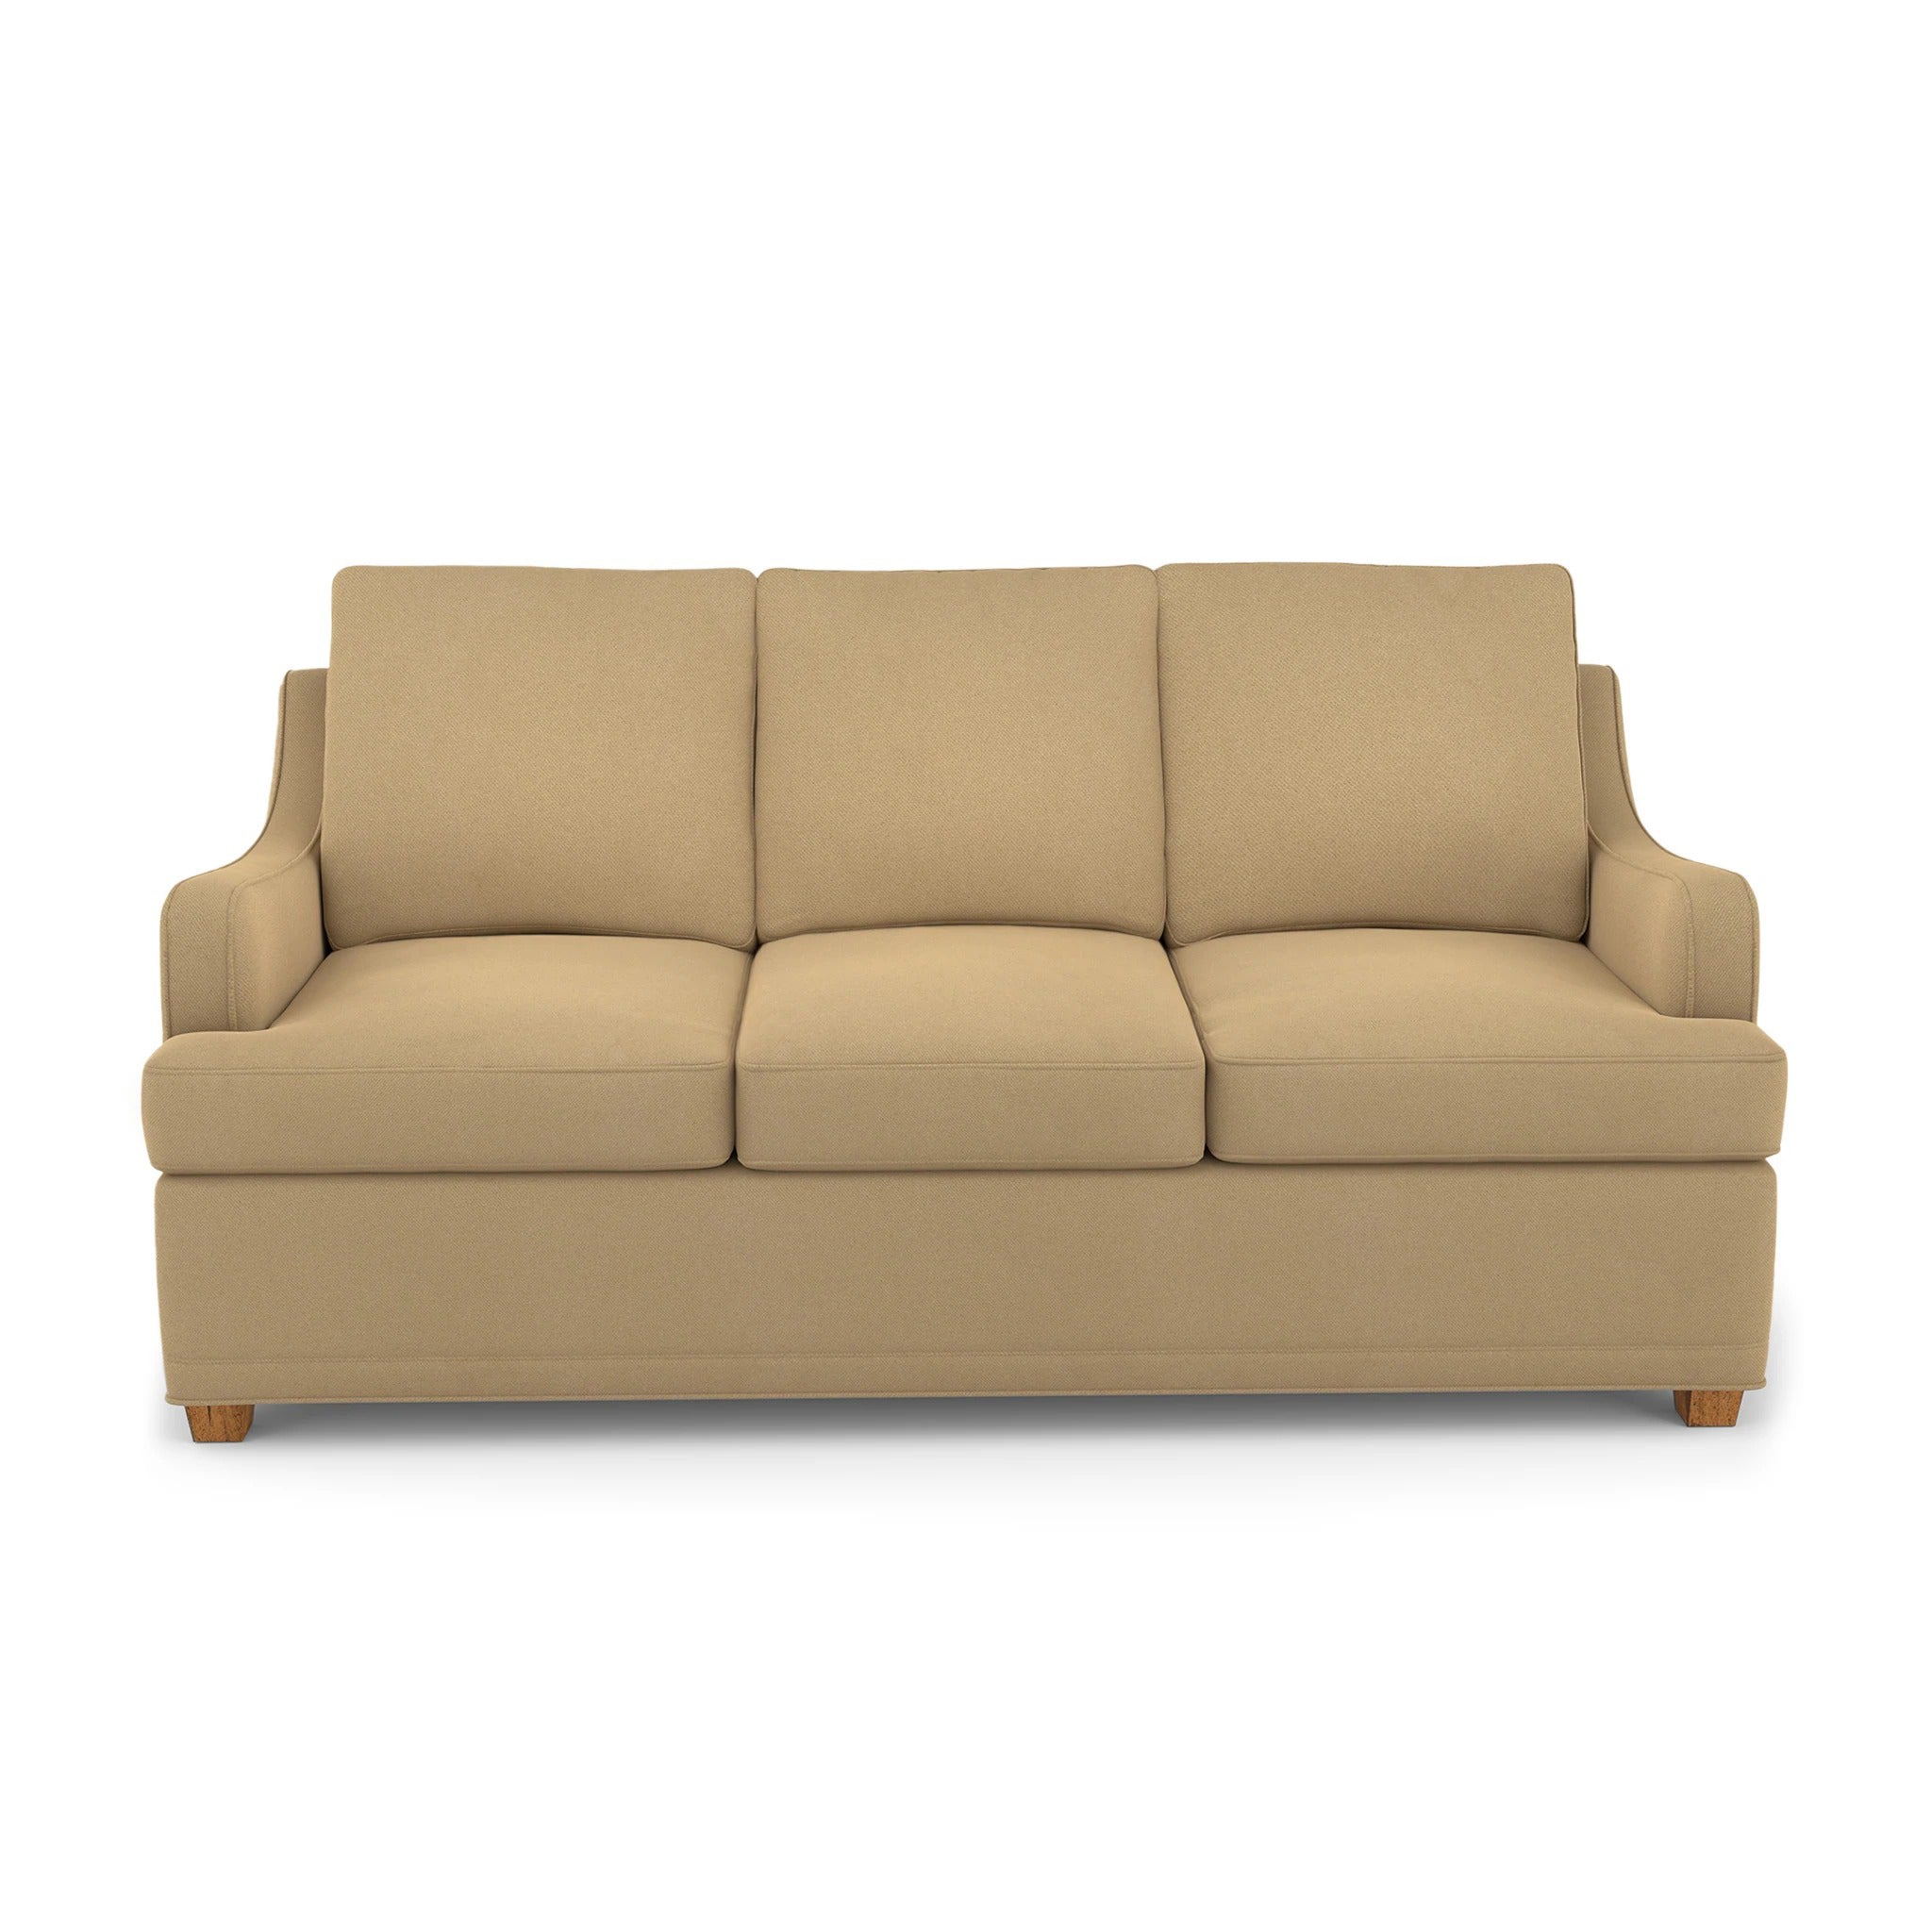 The Lyme Estate Collection - Sofa